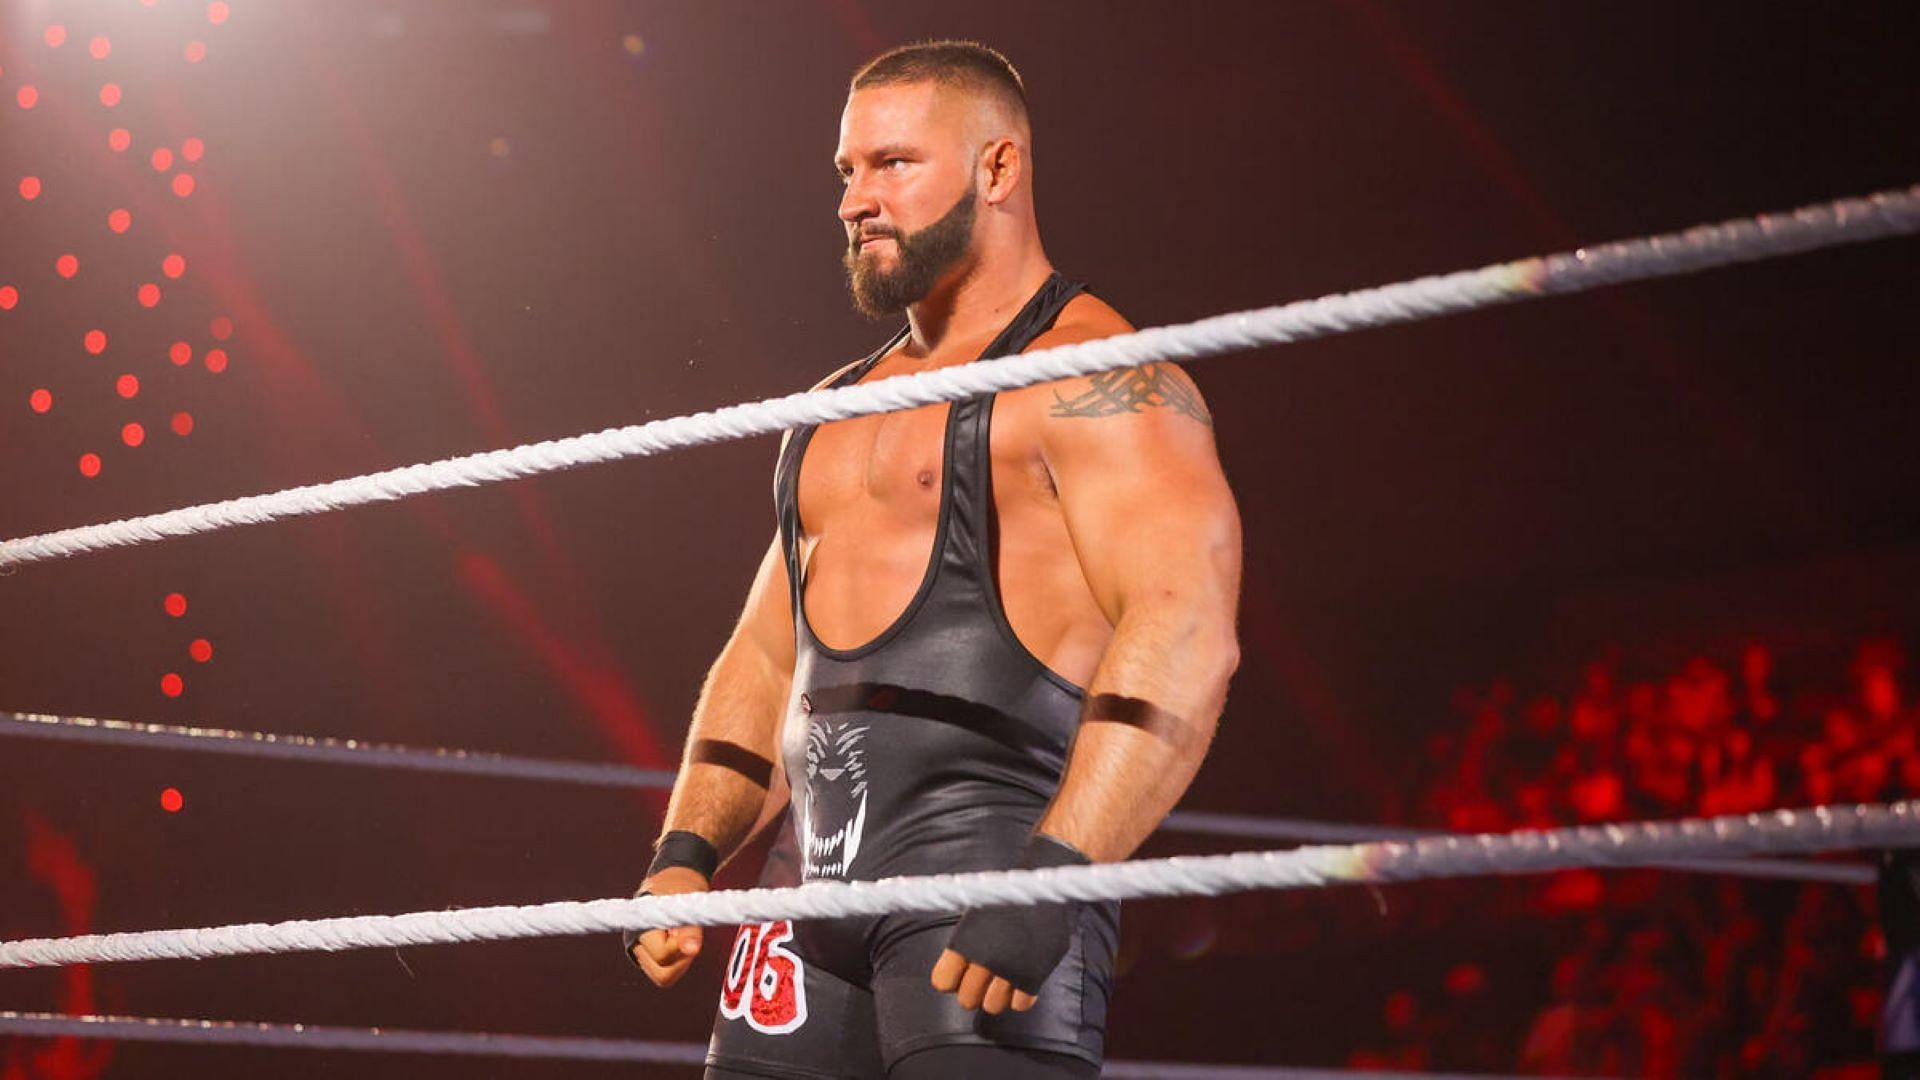 The former NXT Champion had a short but eventful run in the Royal Rumble